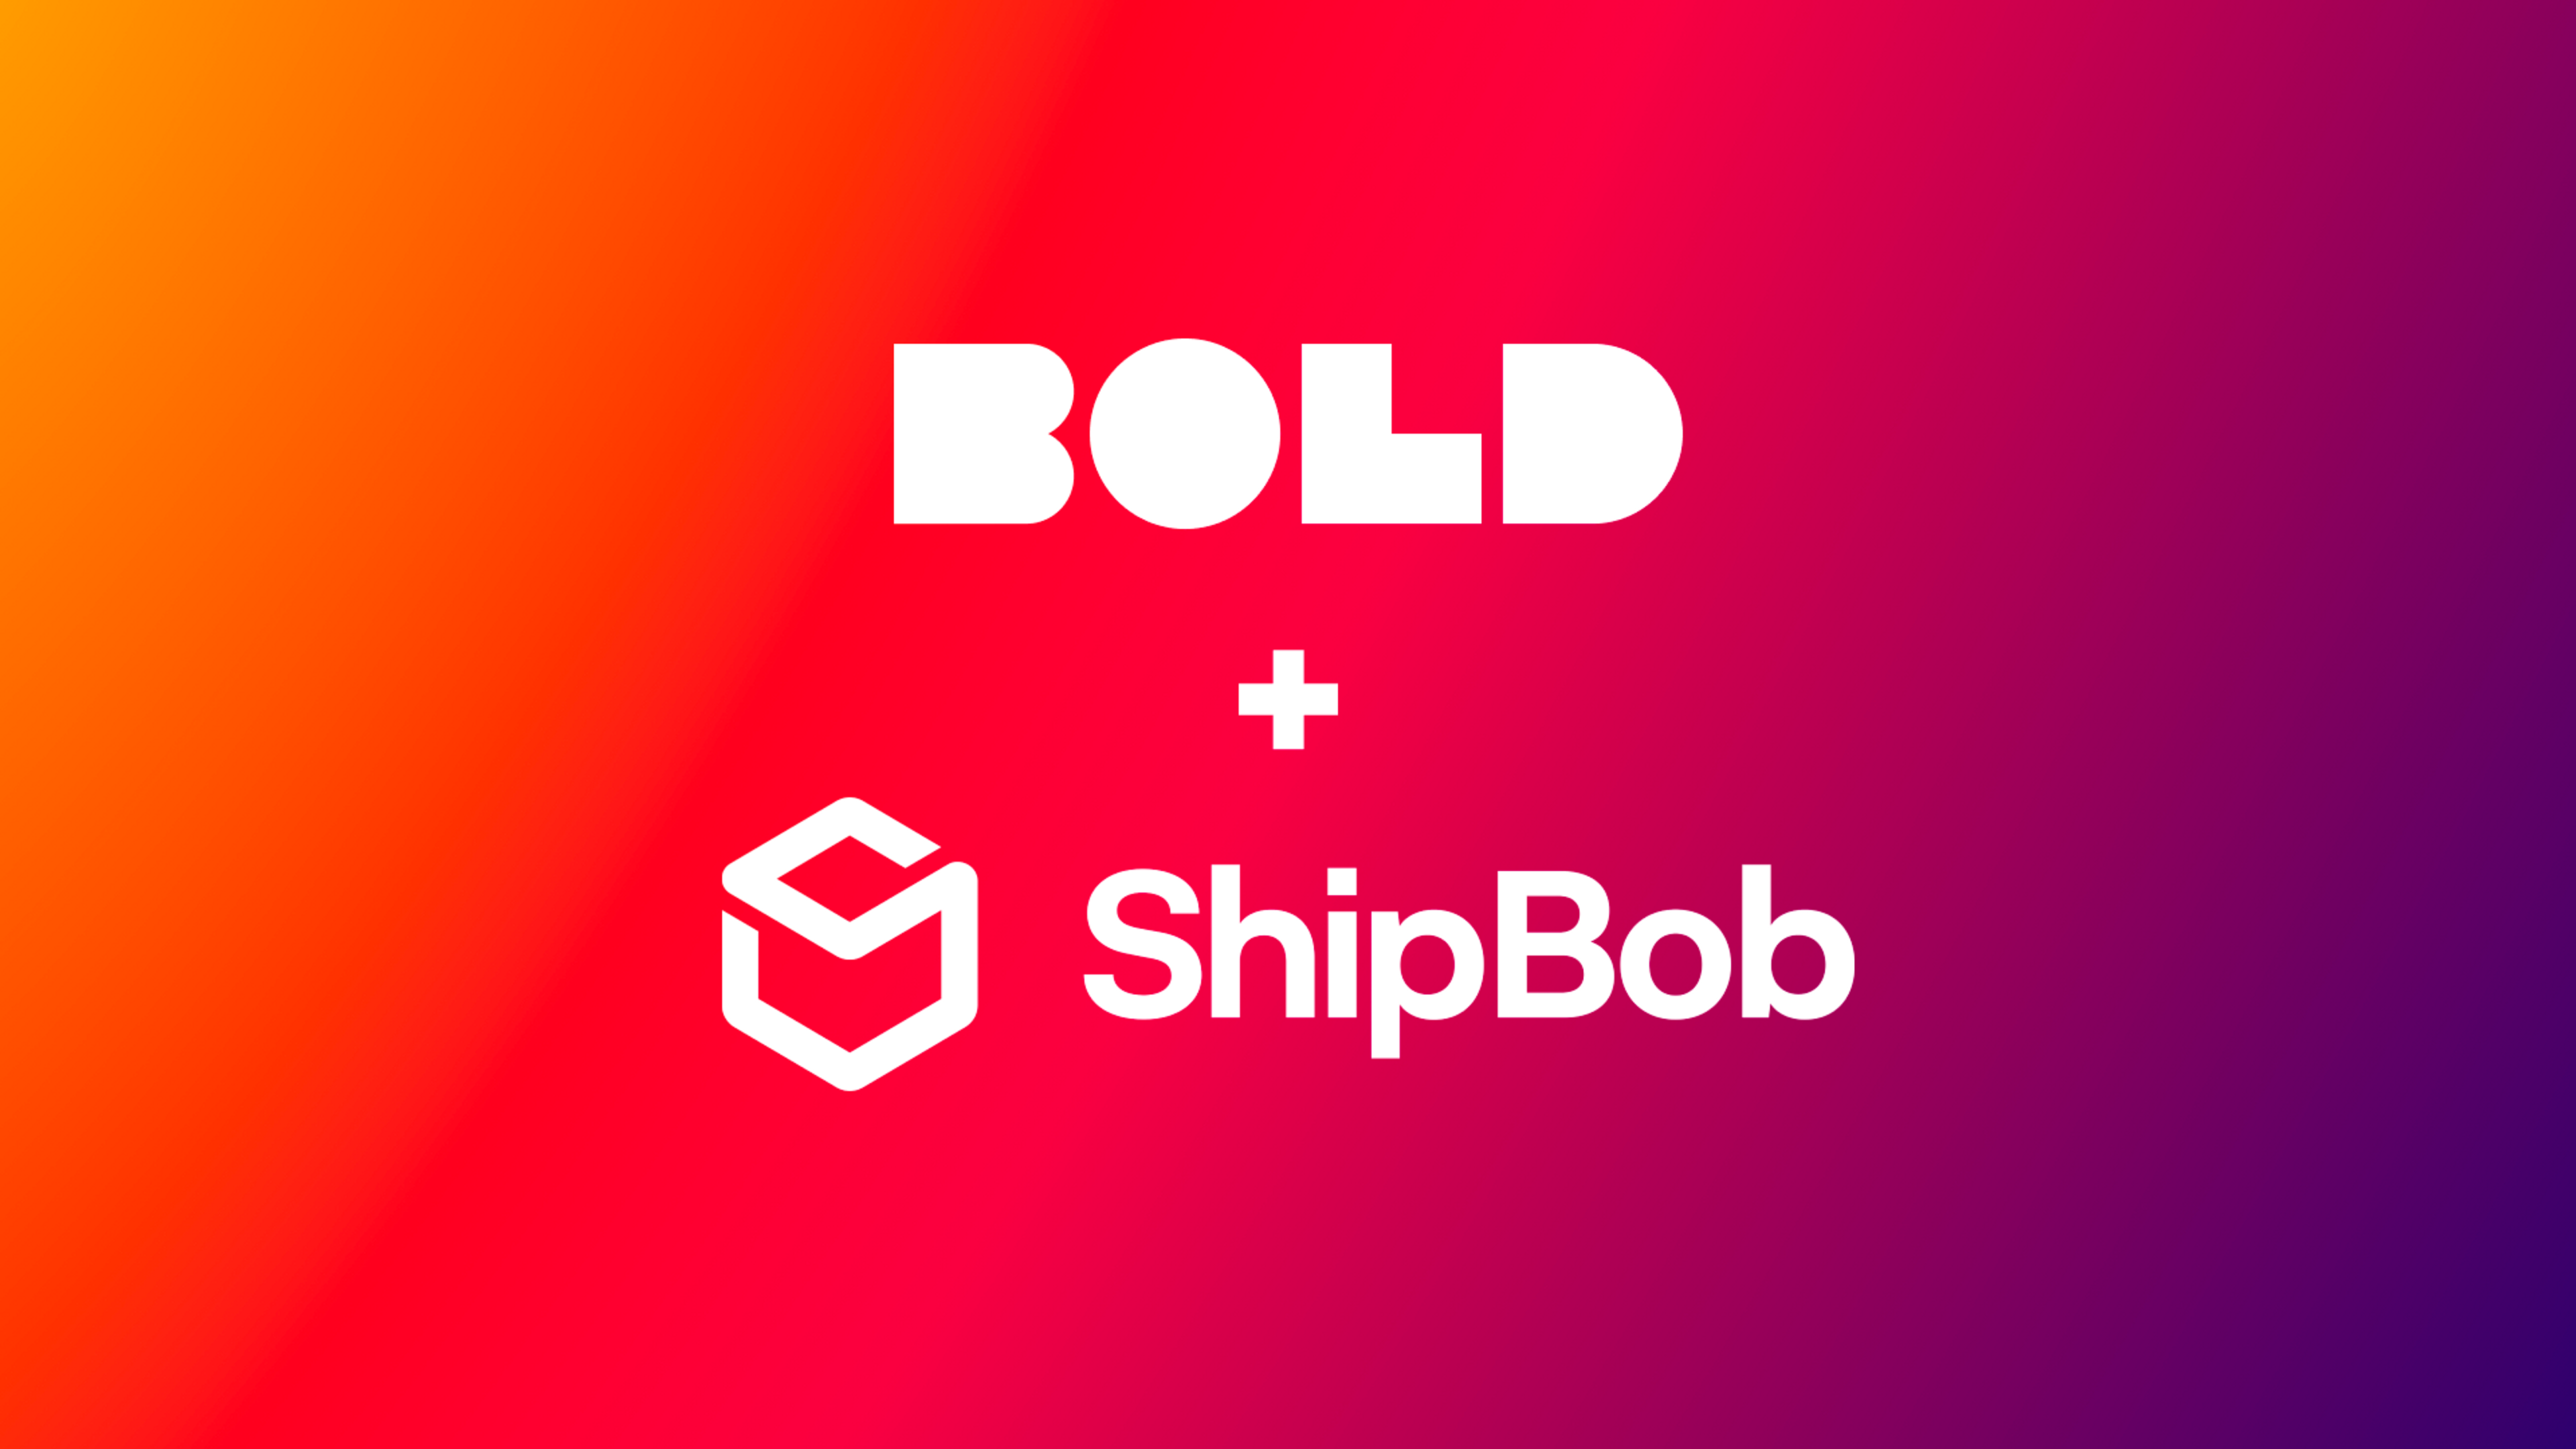 Bold Commerce and ShipBob logos